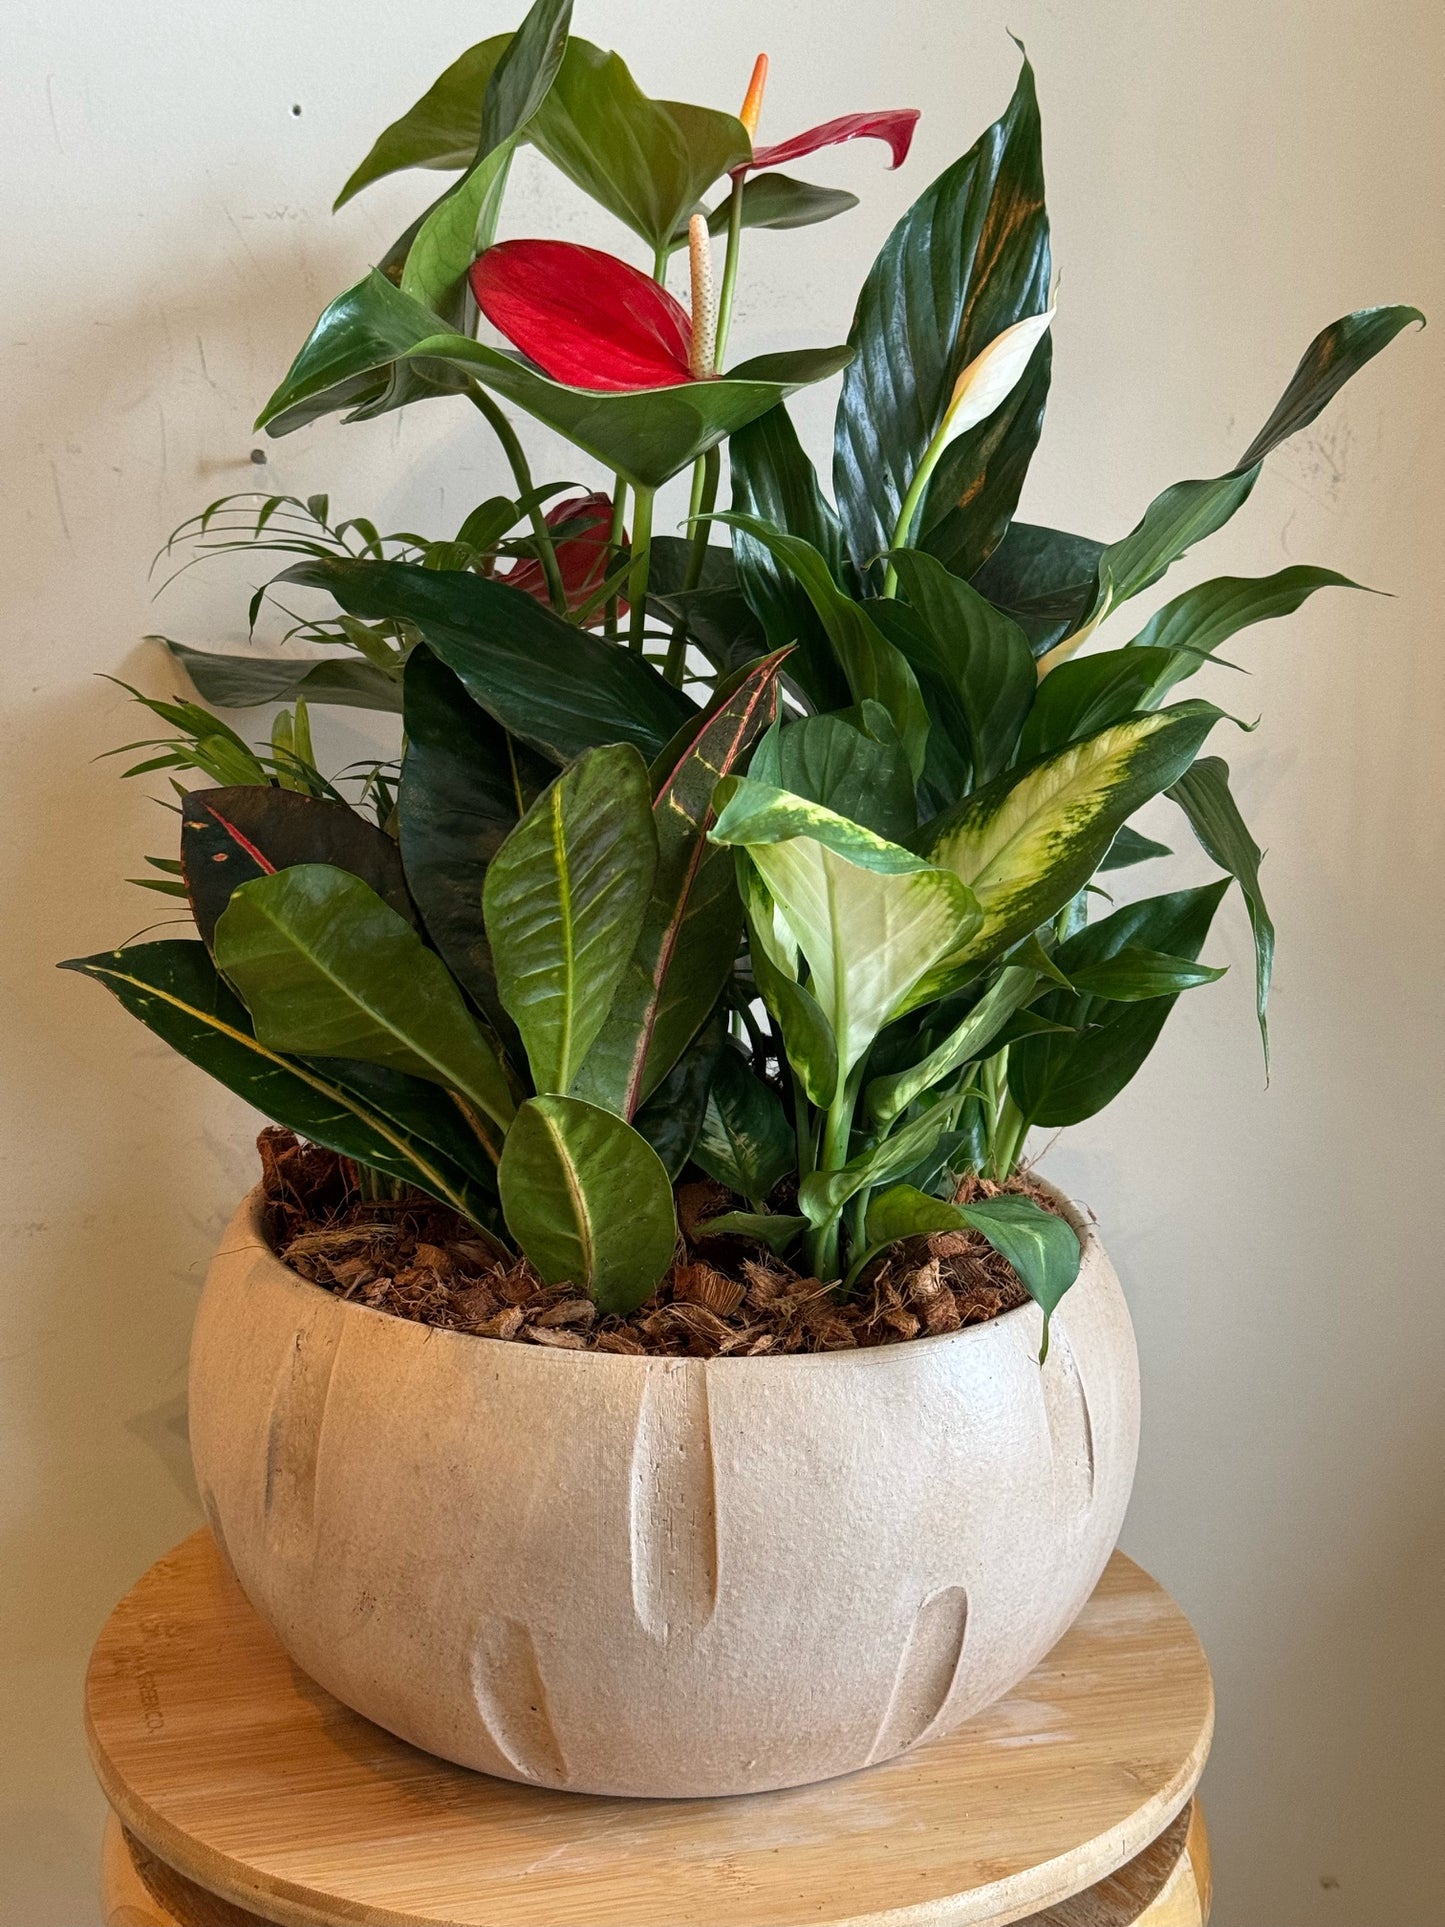 Large Mixed Planter in Decorative Bowl